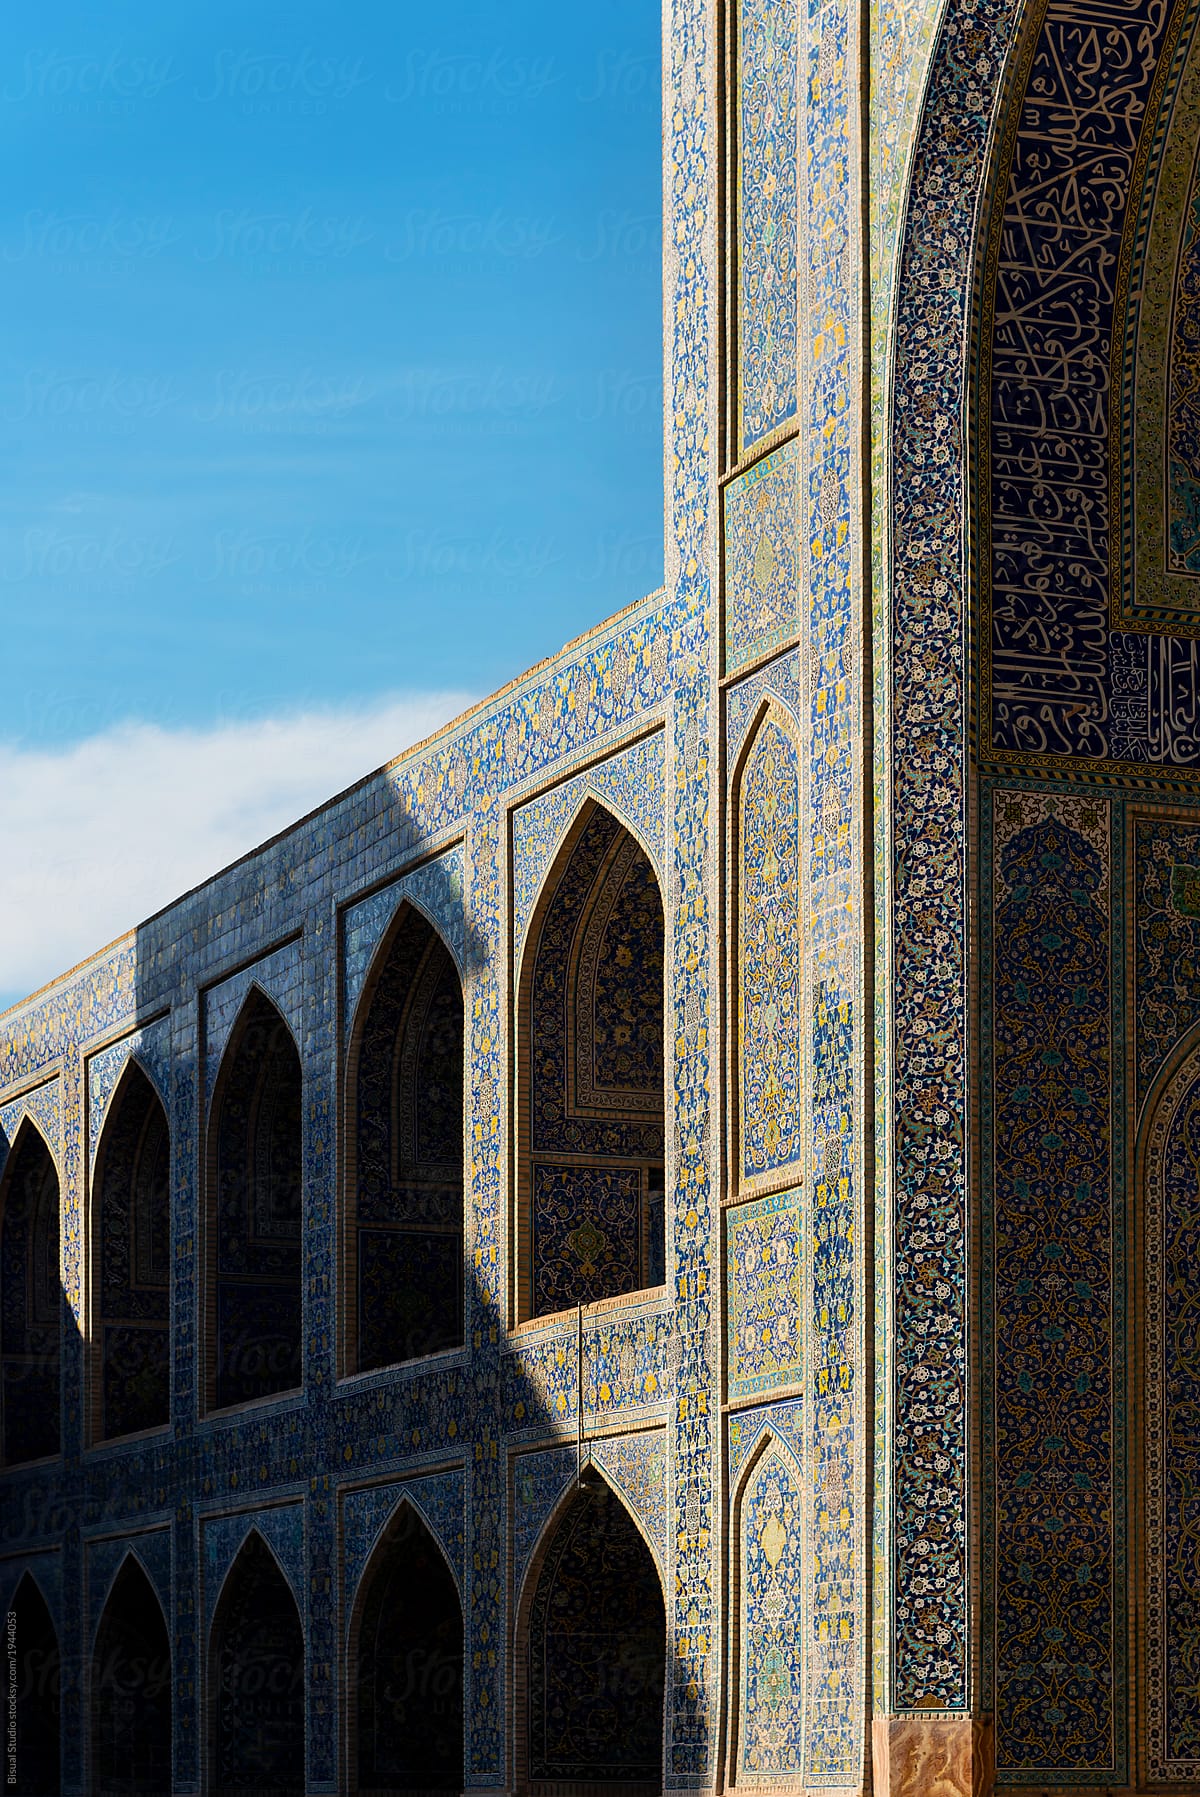 Details of the courtyard walls inside the Shah Mosque in Isfahan, Iran,